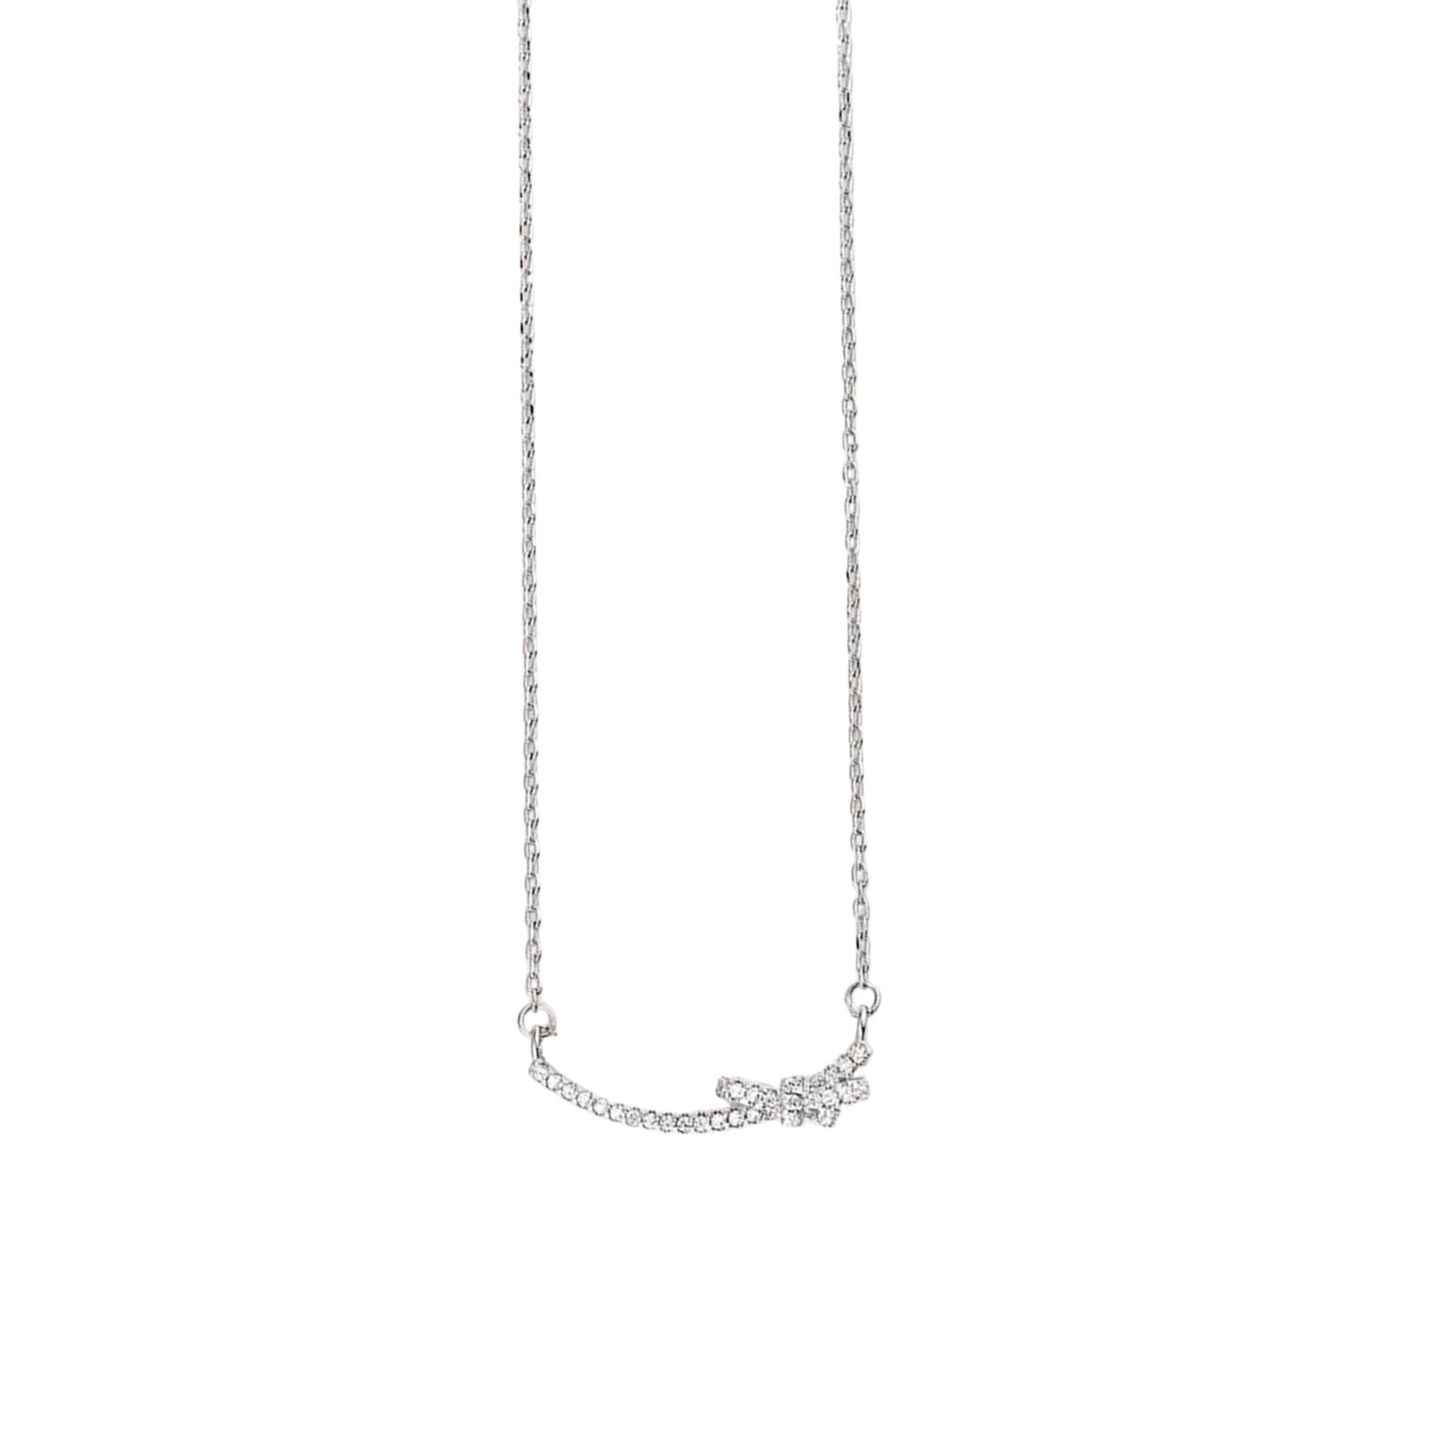 925 Sterling Silver Smile Necklace with Butterfly Knot